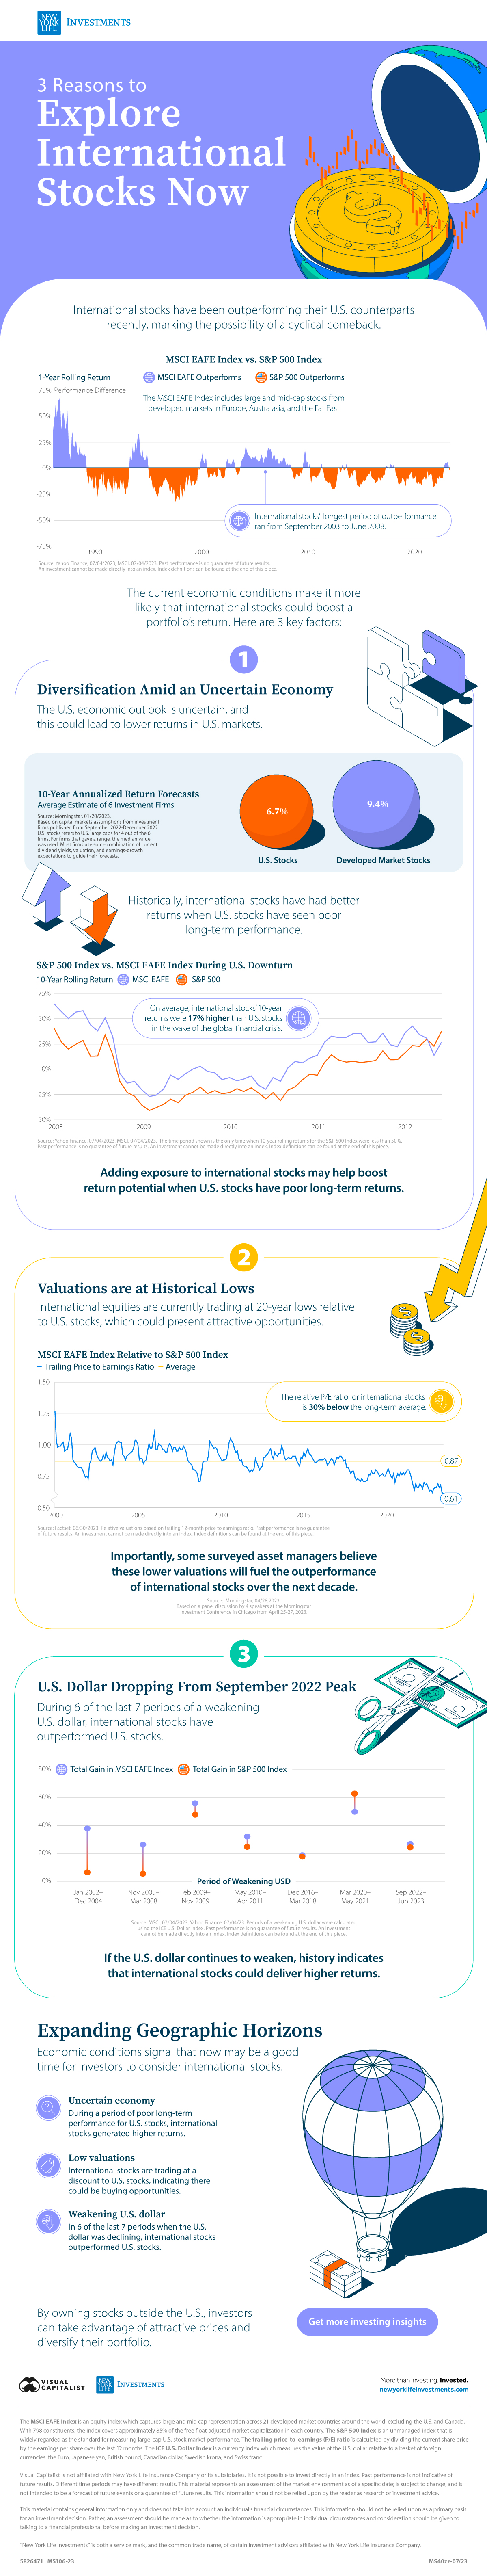 Longform infographic with charts showing that now may be a time for investors to consider international stocks, given that they have outperformed when U.S. stocks have low long-term returns, they have historically low P/E ratios relative to U.S. stocks, and they have outperformed U.S. stocks during 6 of the last 7 periods of a weakening U.S. dollar.